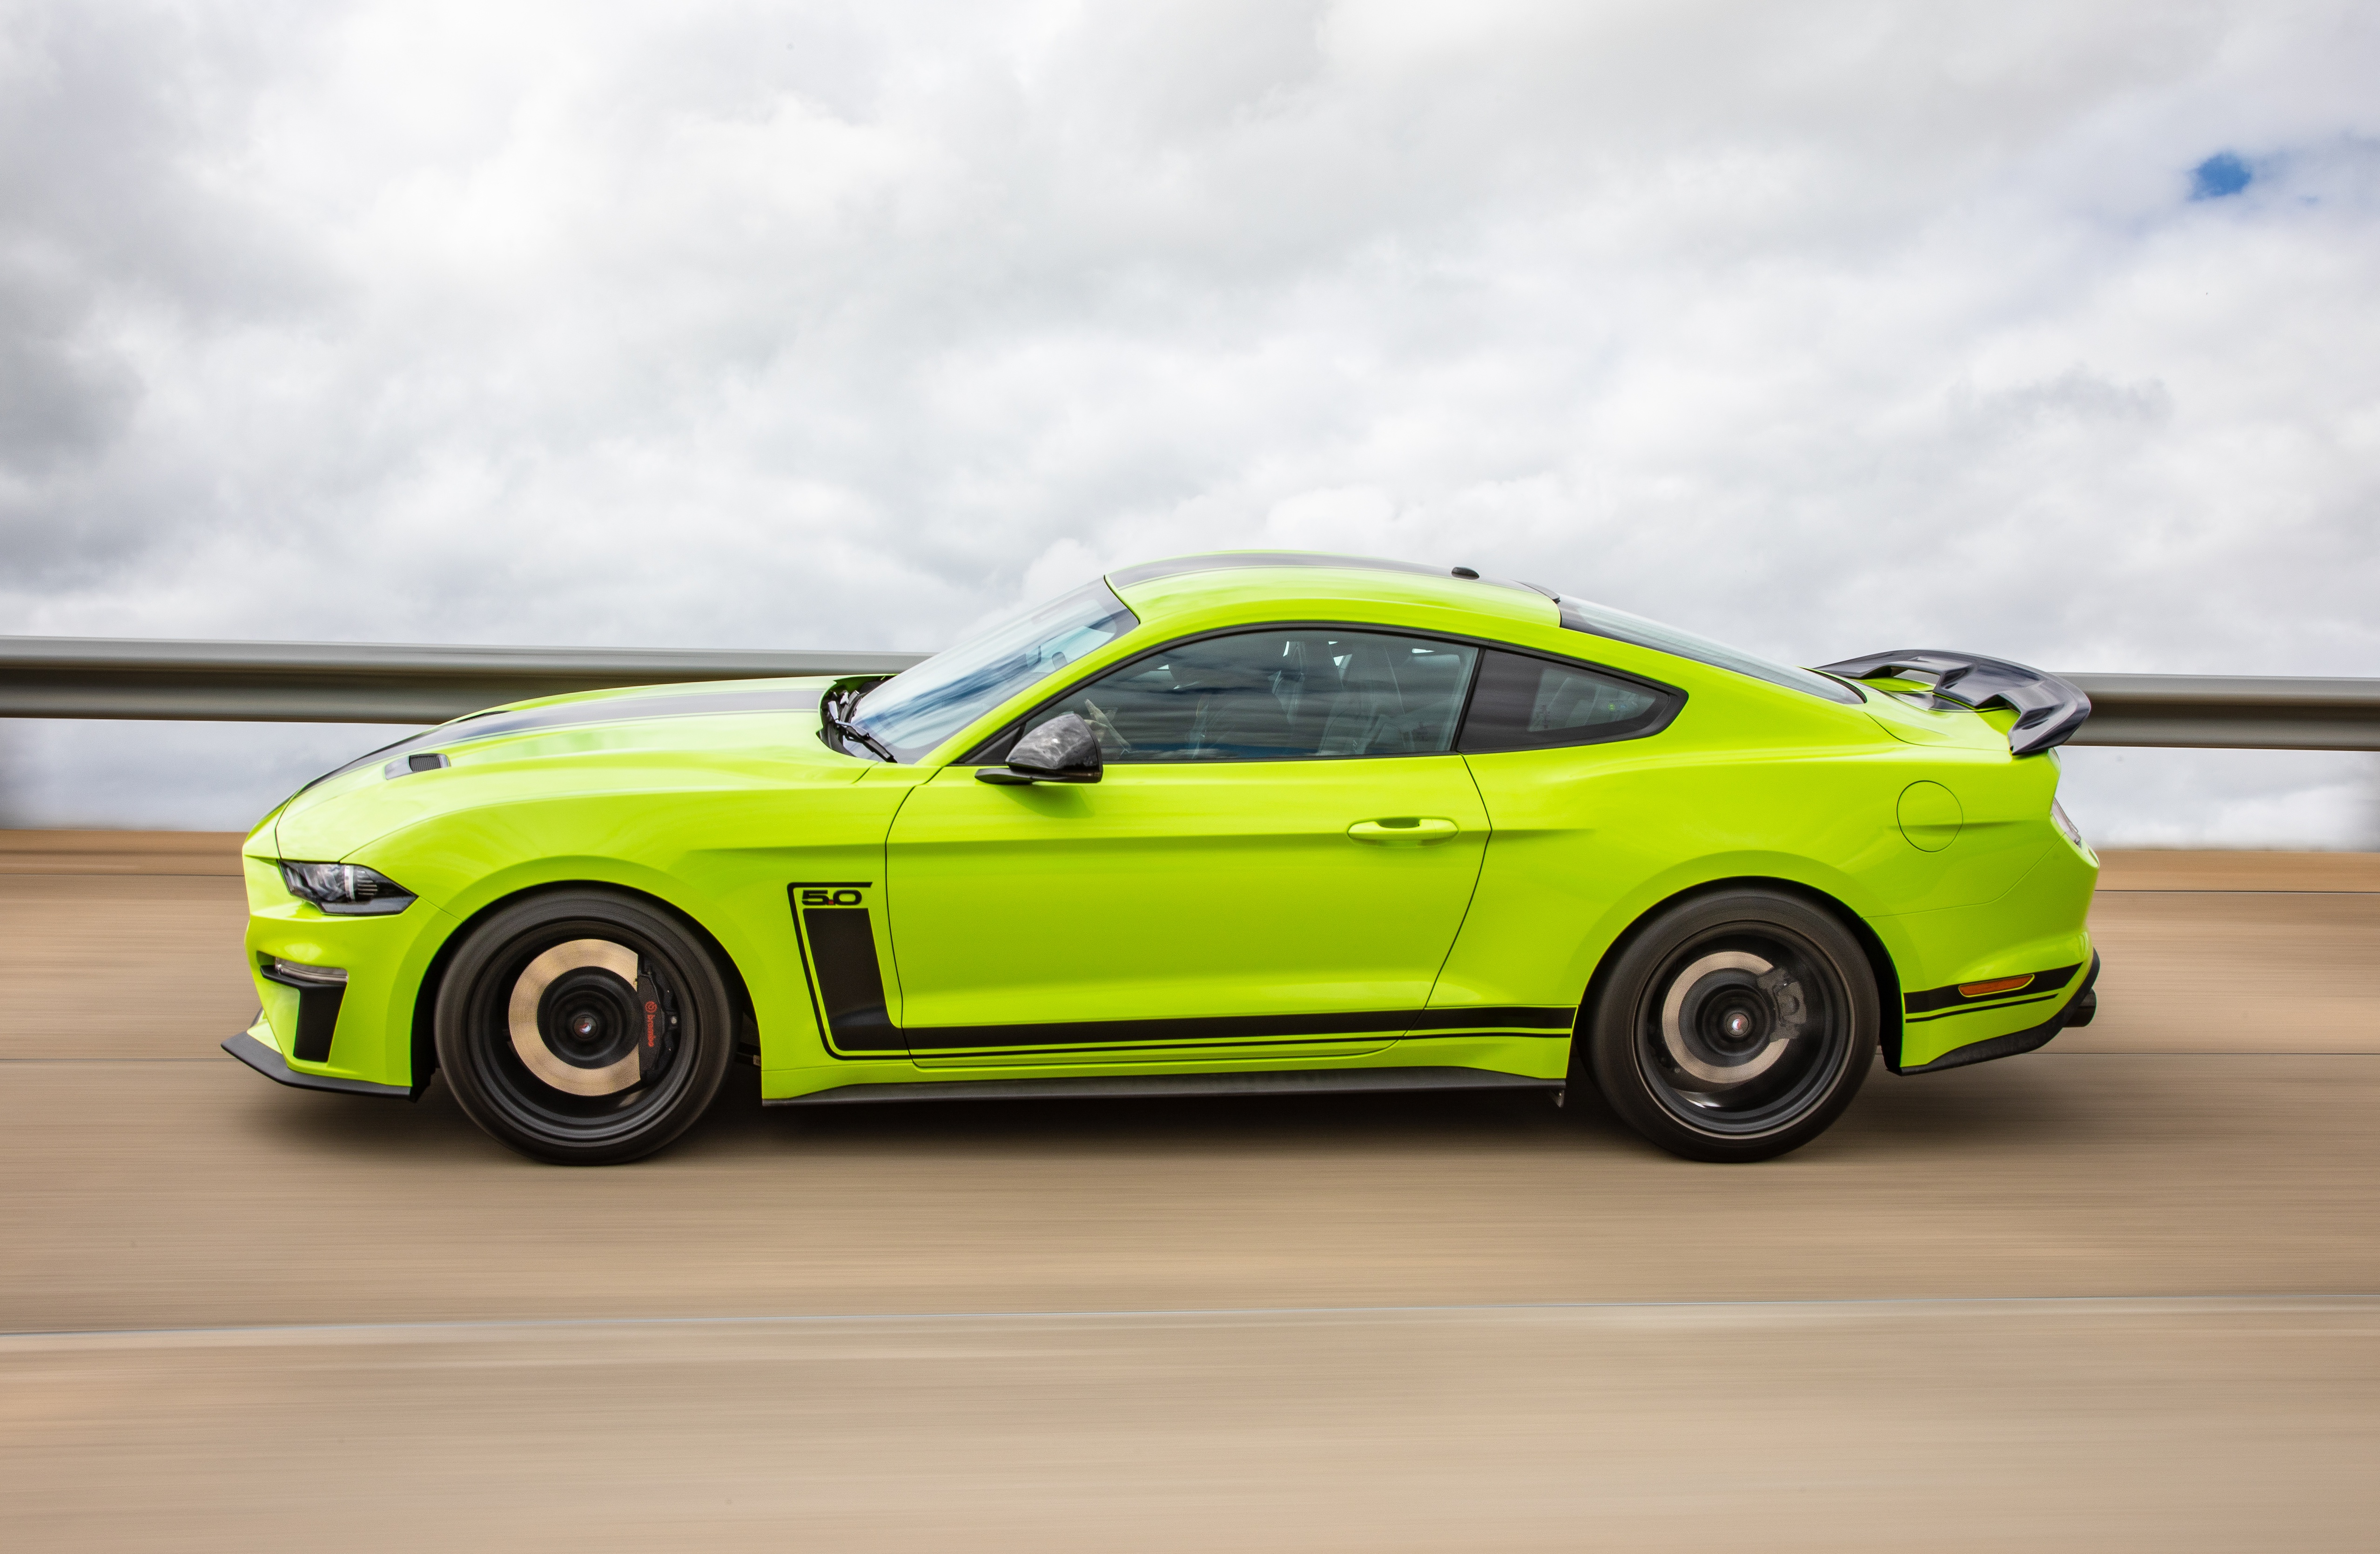 Car Ford Ford Mustang Green Car Muscle Car Vehicle 5114x3339